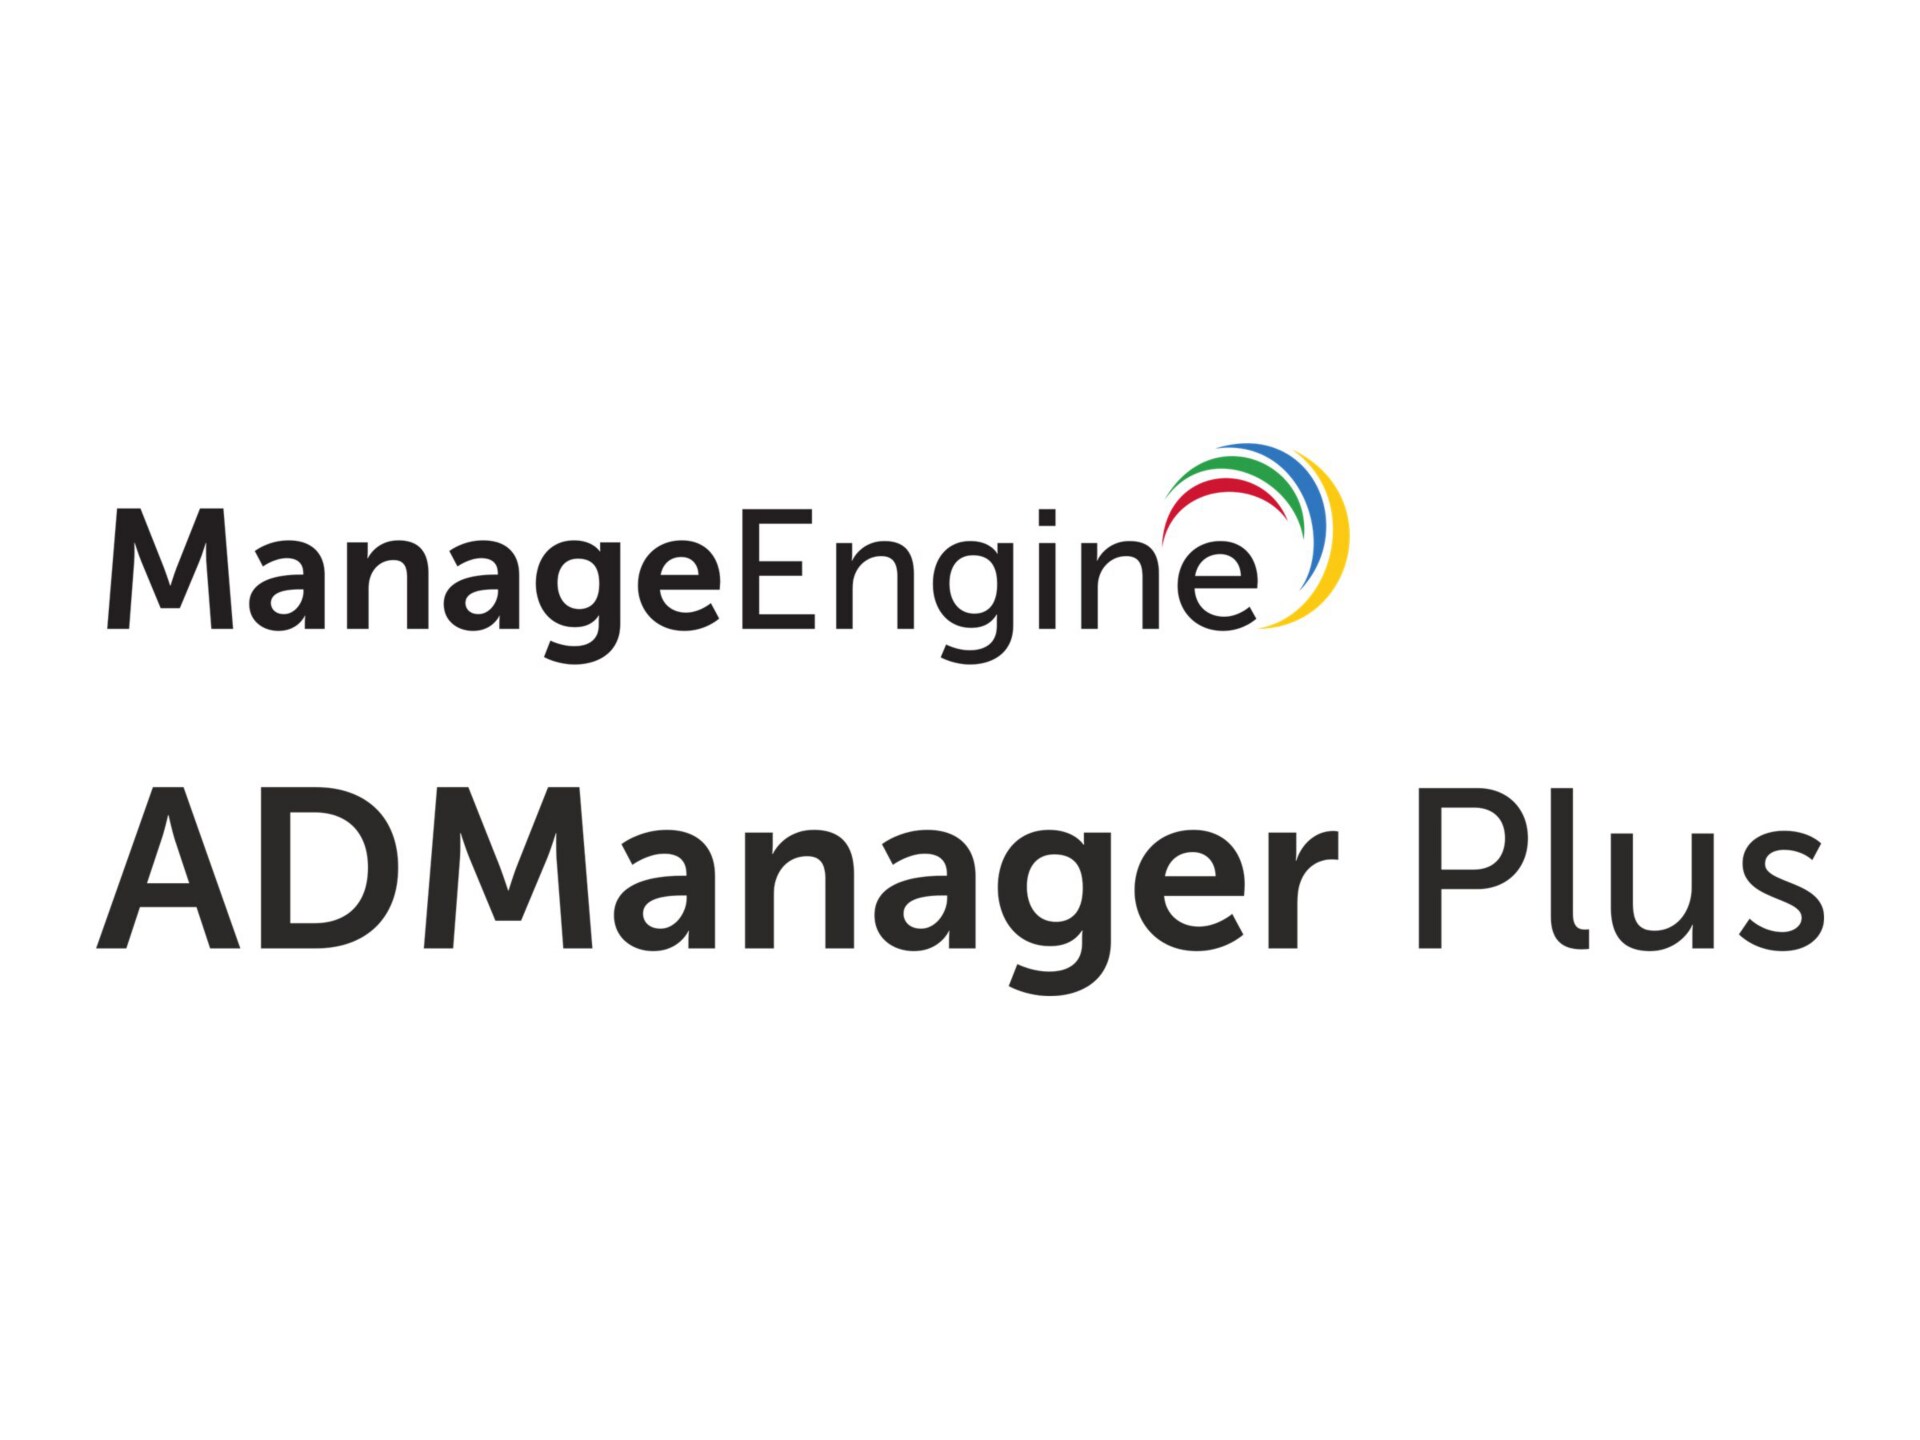 ManageEngine ADManager Plus Professional Edition - Single Installation License - 1 domain, unrestricted objects